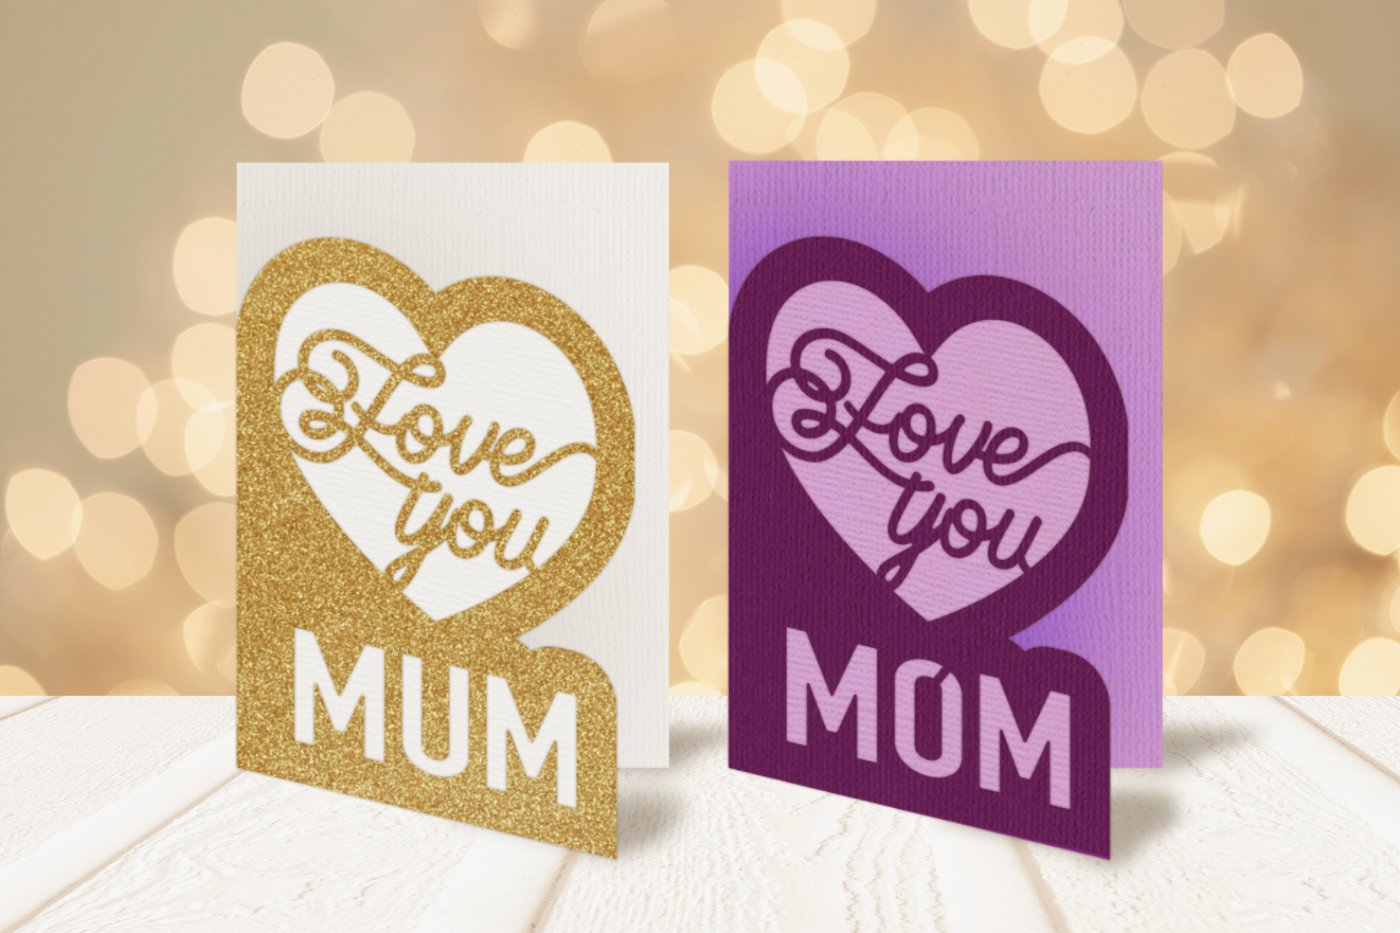 Love you mom and mum card designs